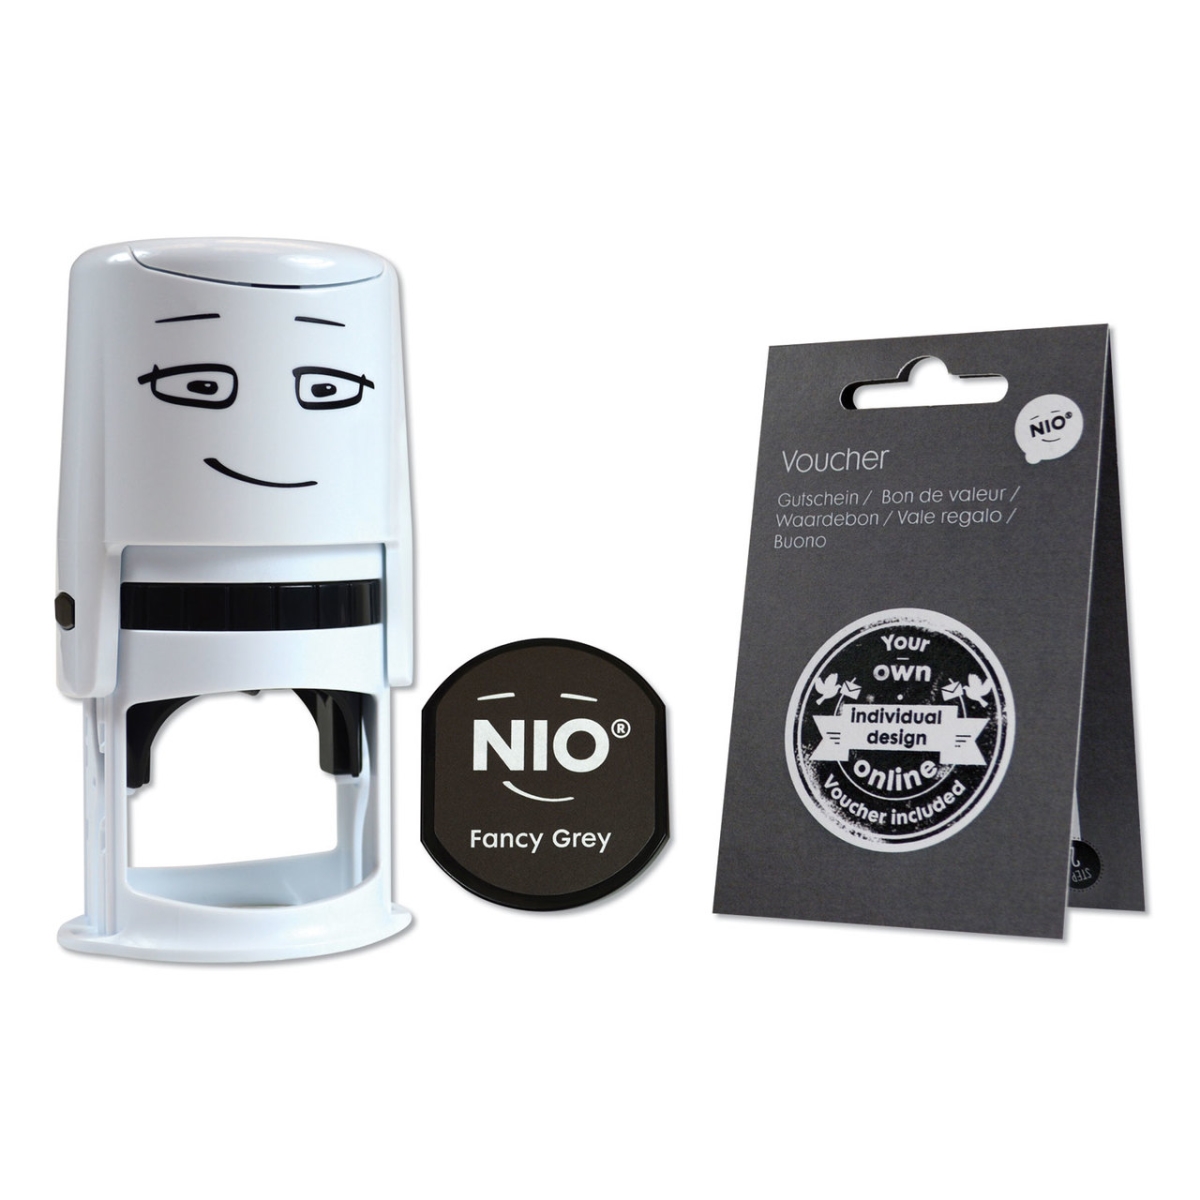 Consolidated Stamp Cos071509 Stamp With Nio Voucher & Fancy Gray Ink Pad